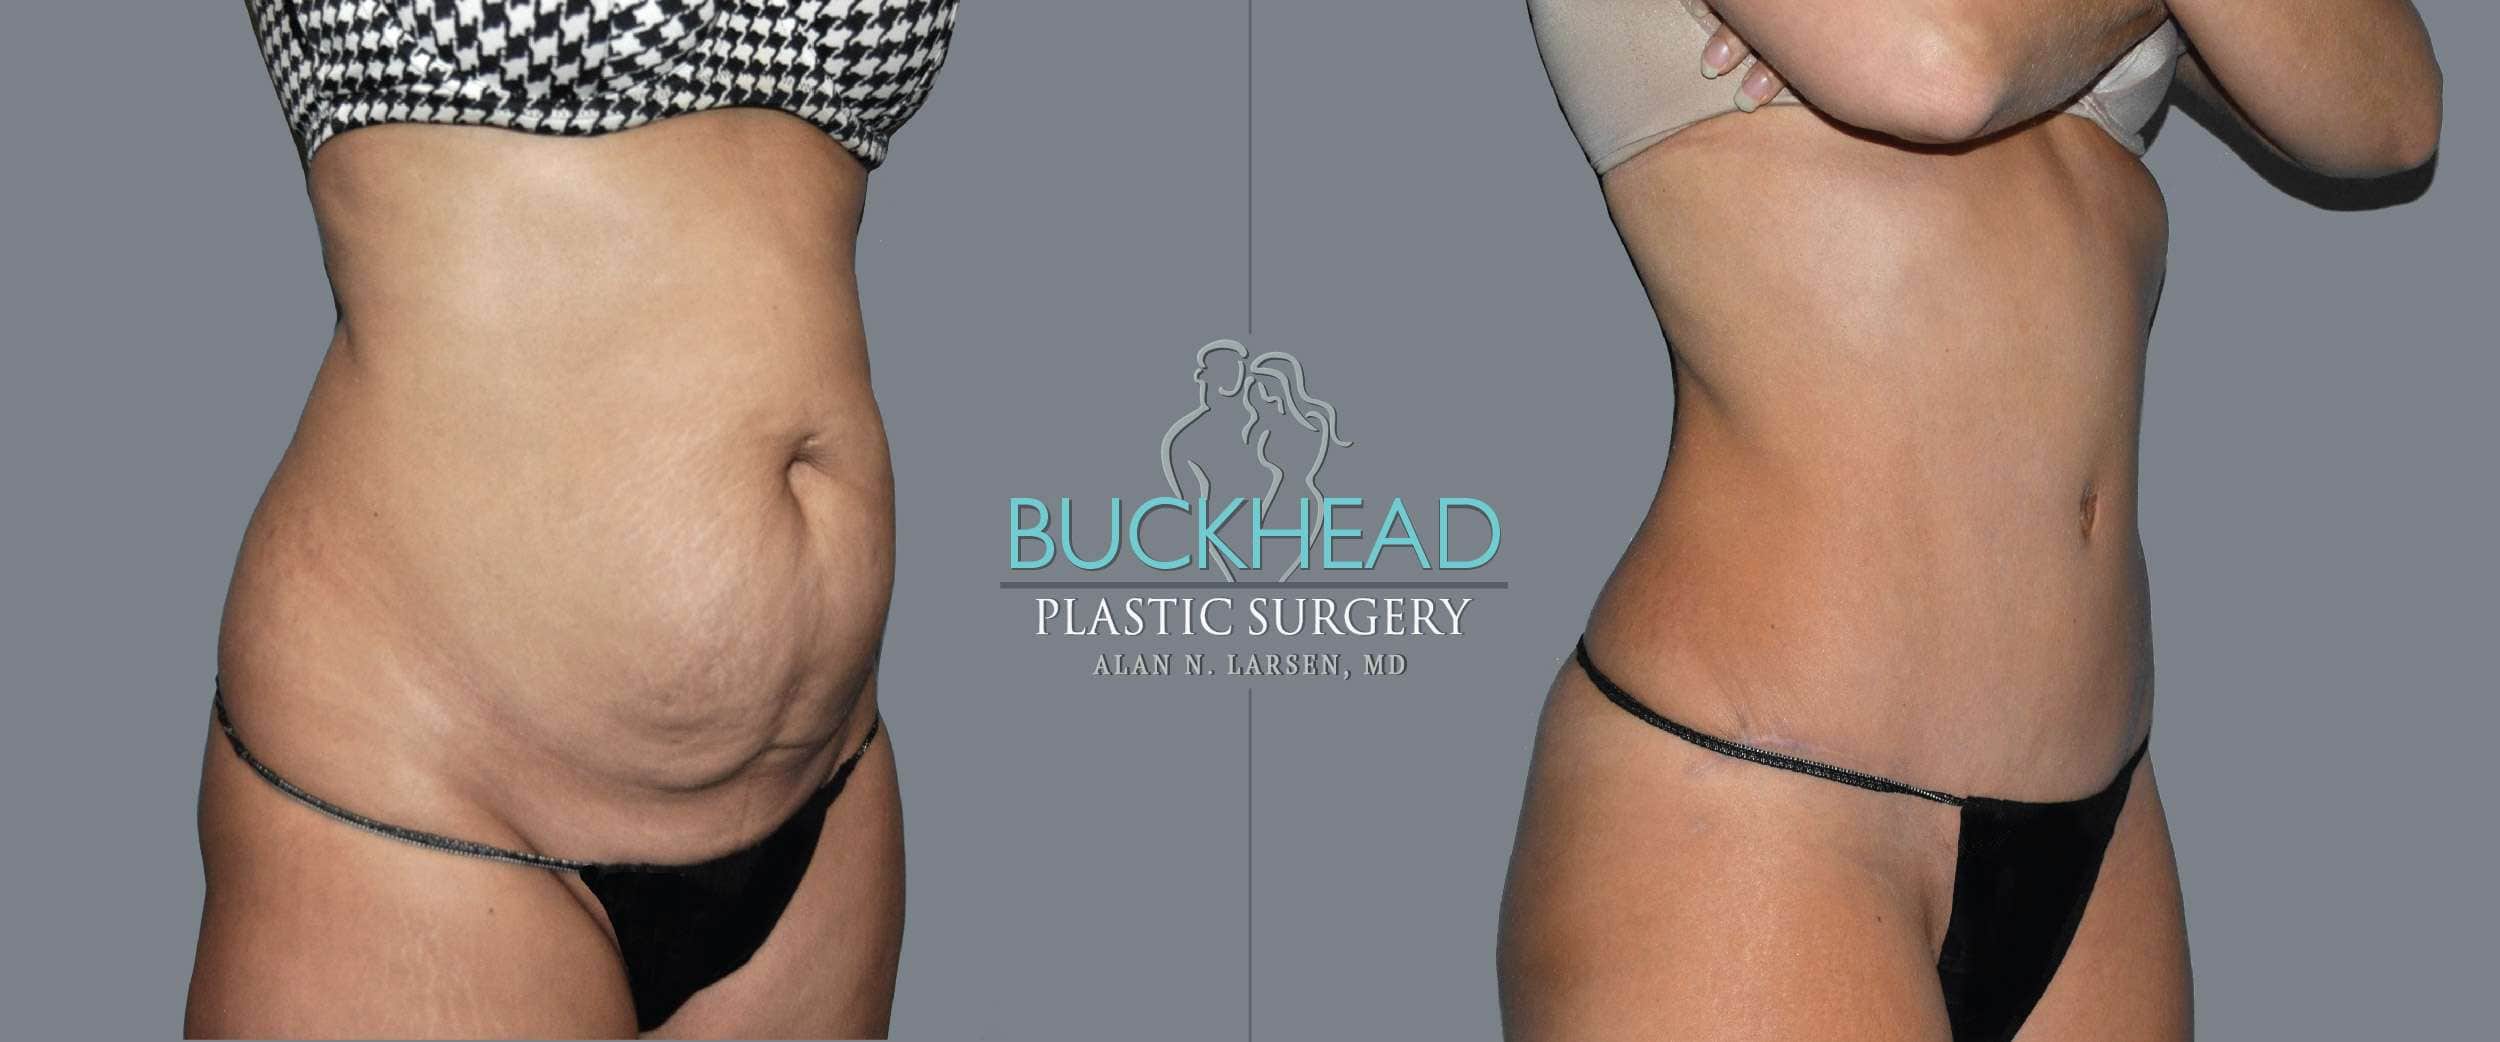 Before and After Photo Gallery | Liposuction - Hips & Flanks | Buckhead Plastic Surgery | Alan N. Larsen, MD | Double Board-Certified Plastic Surgeon | Atlanta GA